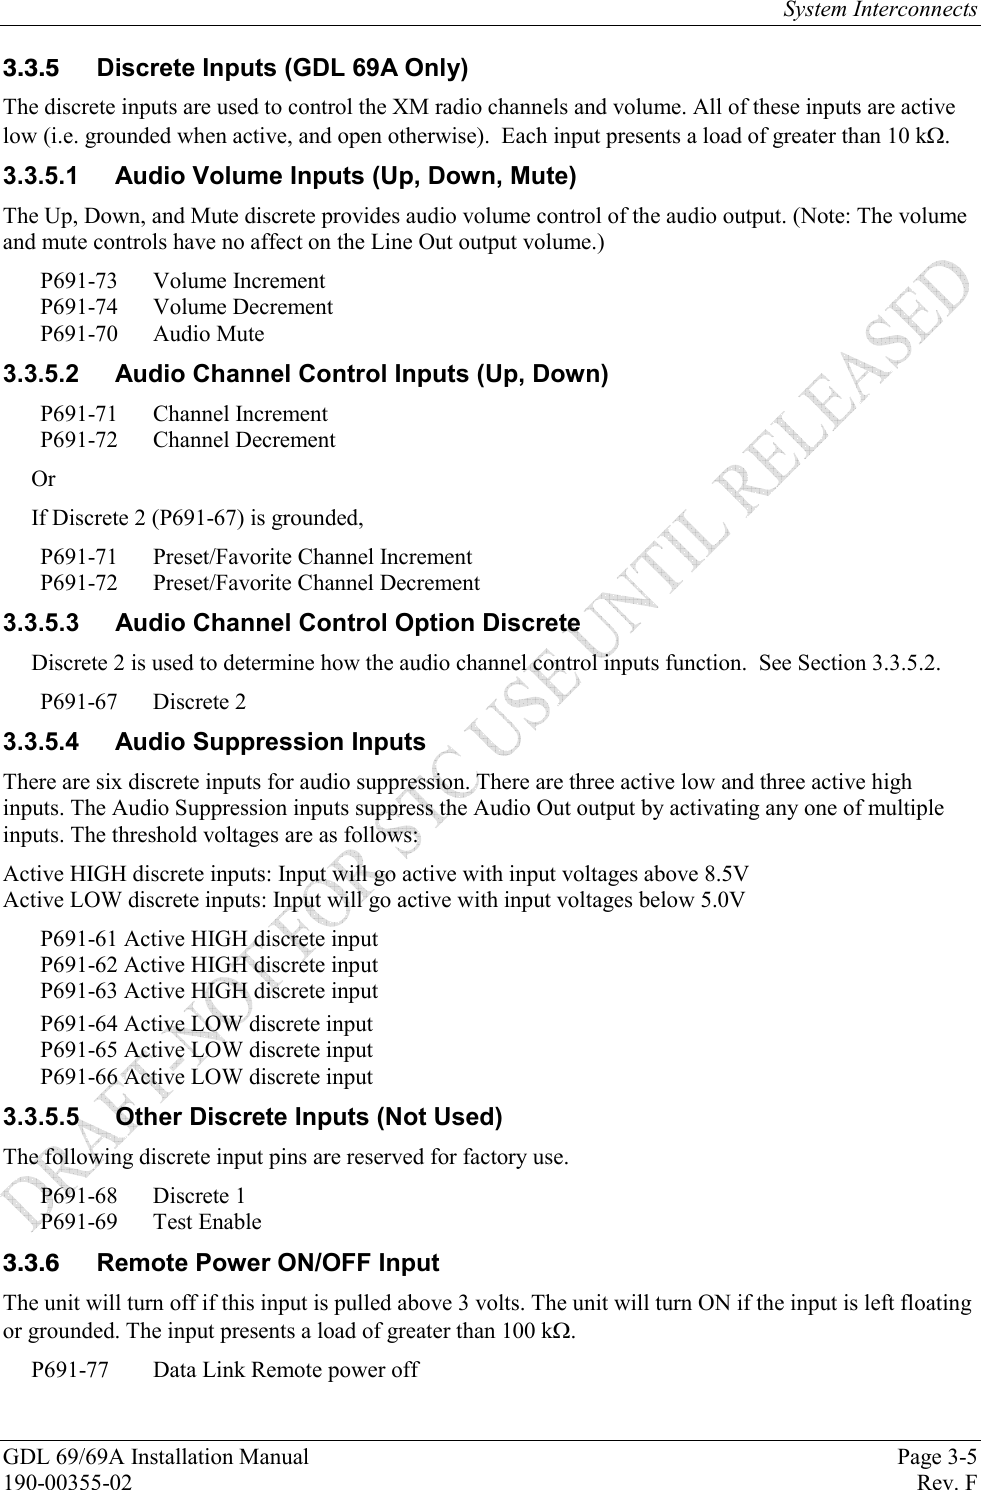 System Interconnects GDL 69/69A Installation Manual  Page 3-5 190-00355-02   Rev. F   Discrete Inputs (GDL 69A Only) The discrete inputs are used to control the XM radio channels and volume. All of these inputs are active low (i.e. grounded when active, and open otherwise).  Each input presents a load of greater than 10 k. 3.3.5.1  Audio Volume Inputs (Up, Down, Mute) The Up, Down, and Mute discrete provides audio volume control of the audio output. (Note: The volume and mute controls have no affect on the Line Out output volume.) P691-73 Volume Increment P691-74 Volume Decrement P691-70 Audio Mute 3.3.5.2  Audio Channel Control Inputs (Up, Down) P691-71 Channel Increment P691-72 Channel Decrement Or If Discrete 2 (P691-67) is grounded, P691-71  Preset/Favorite Channel Increment P691-72  Preset/Favorite Channel Decrement 3.3.5.3  Audio Channel Control Option Discrete Discrete 2 is used to determine how the audio channel control inputs function.  See Section 3.3.5.2. P691-67 Discrete 2 3.3.5.4  Audio Suppression Inputs There are six discrete inputs for audio suppression. There are three active low and three active high inputs. The Audio Suppression inputs suppress the Audio Out output by activating any one of multiple inputs. The threshold voltages are as follows: Active HIGH discrete inputs: Input will go active with input voltages above 8.5V Active LOW discrete inputs: Input will go active with input voltages below 5.0V P691-61 Active HIGH discrete input P691-62 Active HIGH discrete input P691-63 Active HIGH discrete input P691-64 Active LOW discrete input P691-65 Active LOW discrete input P691-66 Active LOW discrete input 3.3.5.5 Other Discrete Inputs (Not Used) The following discrete input pins are reserved for factory use. P691-68 Discrete 1 P691-69 Test Enable   Remote Power ON/OFF Input The unit will turn off if this input is pulled above 3 volts. The unit will turn ON if the input is left floating or grounded. The input presents a load of greater than 100 k. P691-77  Data Link Remote power off 